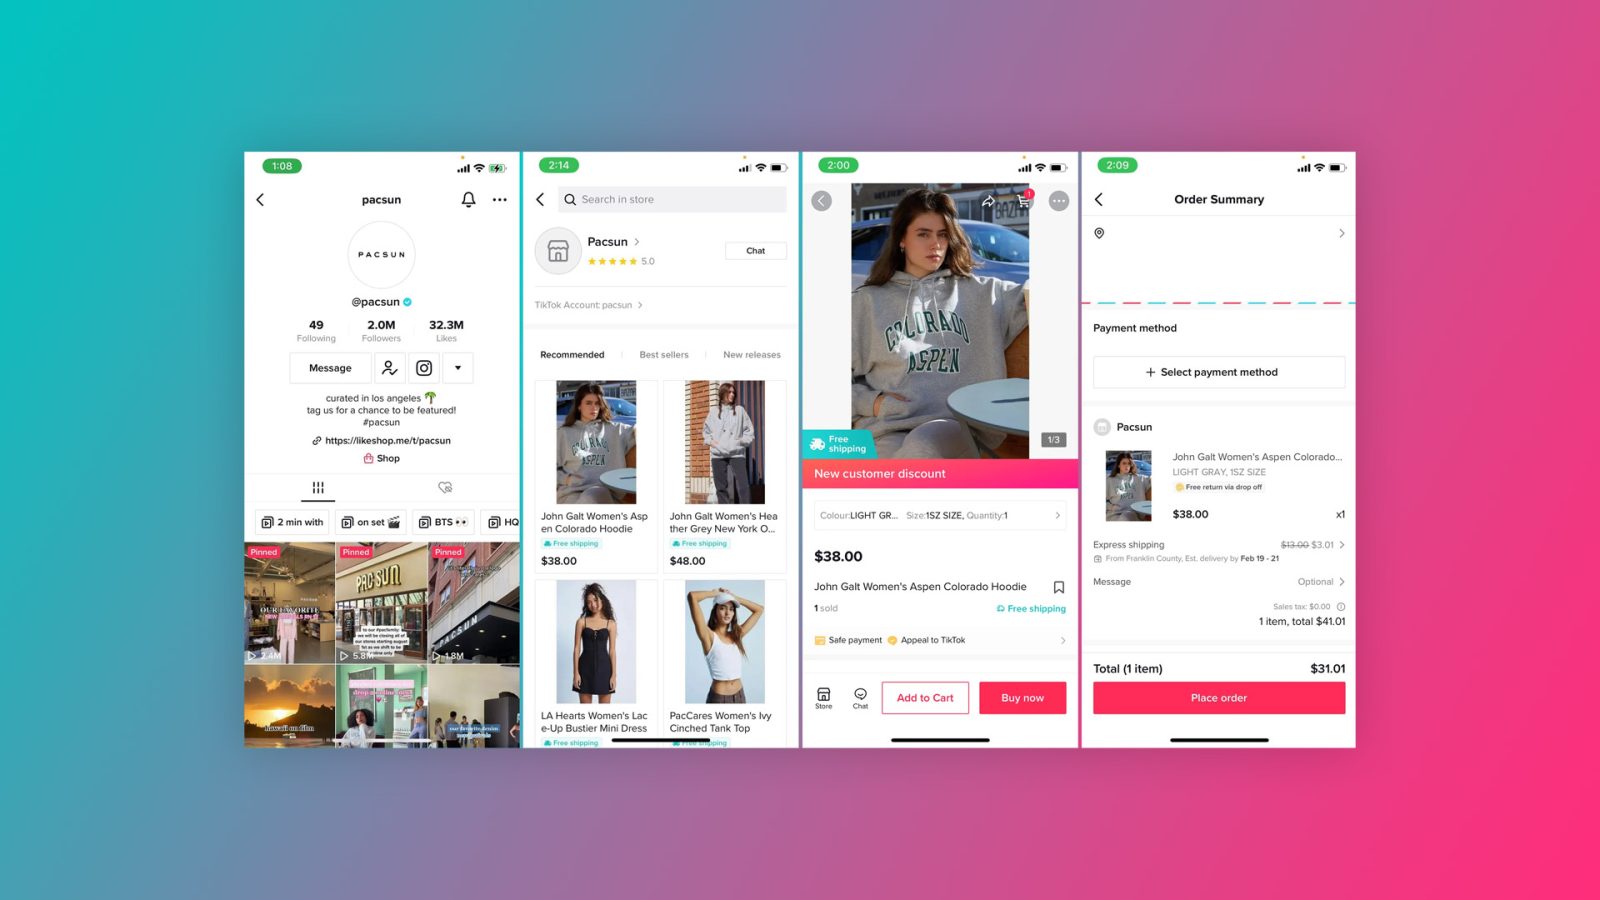 TikTok has been working on shopping features while Instagram does the exact opposite